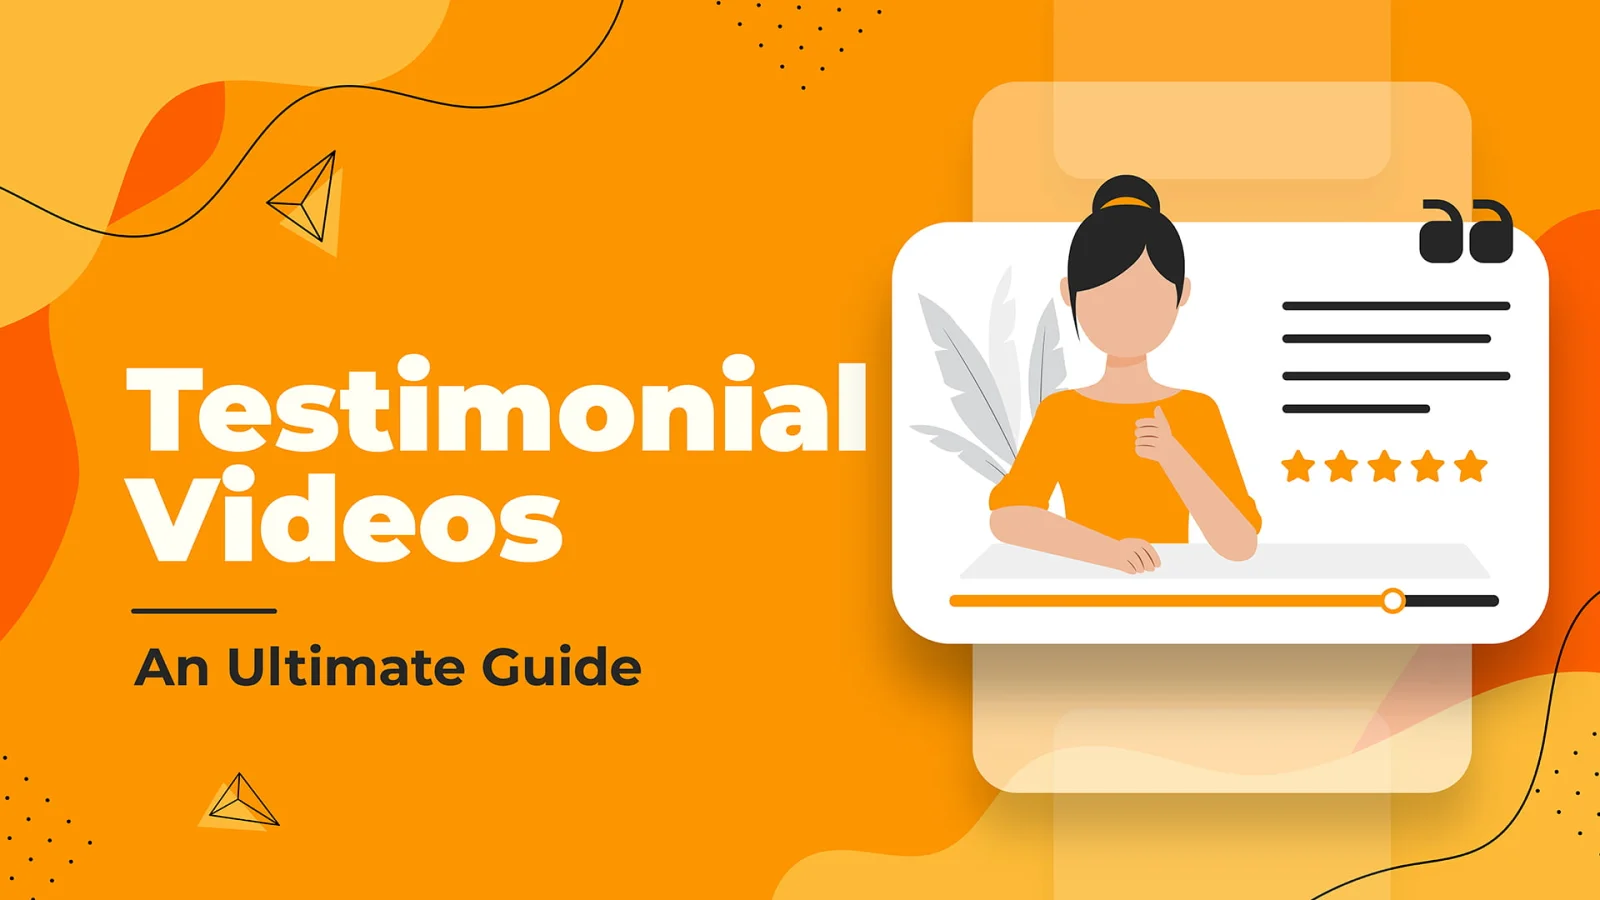 Testimonial Videos: The Ultimate Guide